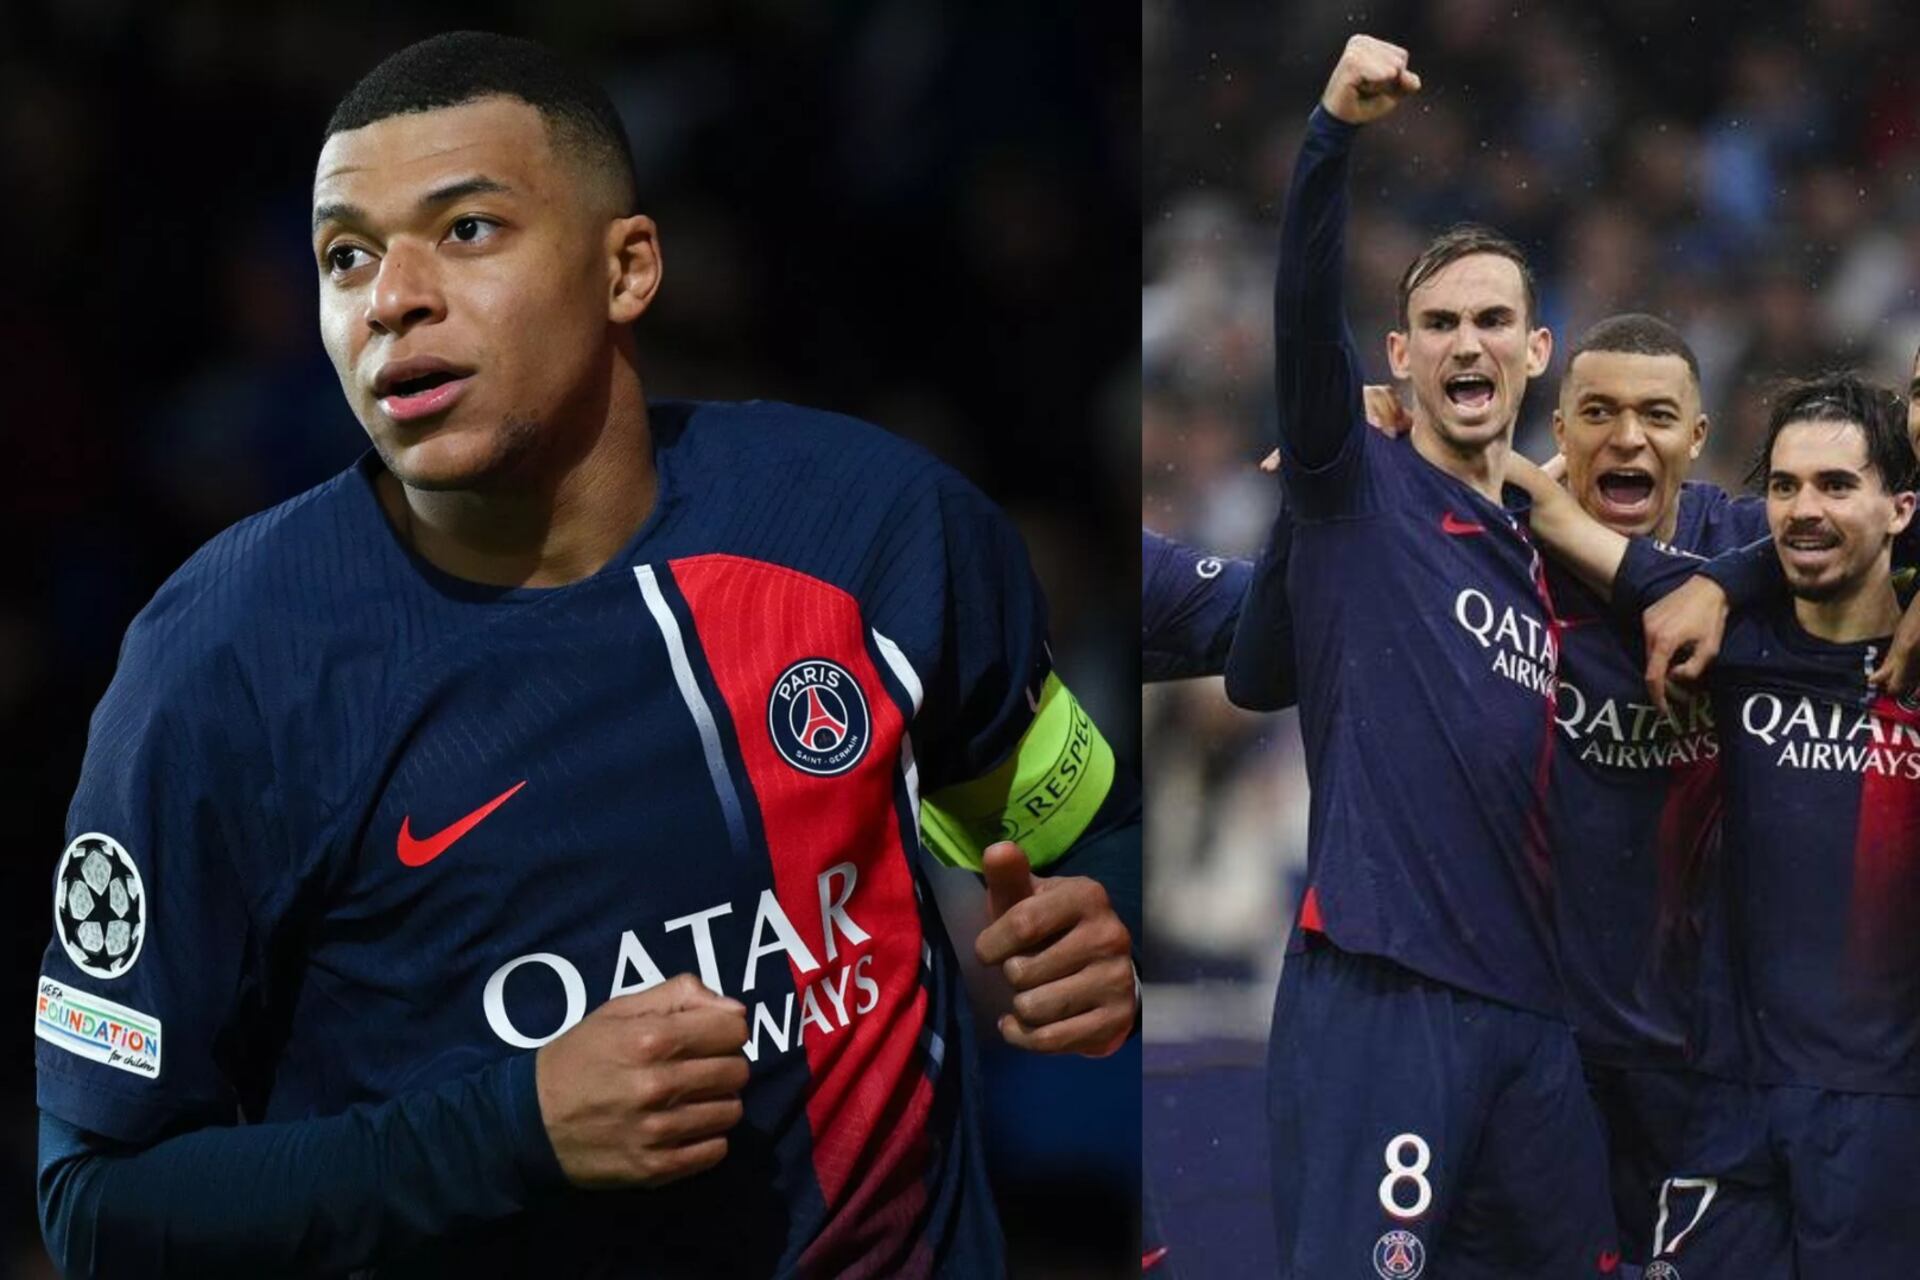 Kylian Mbappé is the top goal scorer of PSG, the impressive list he tops as well